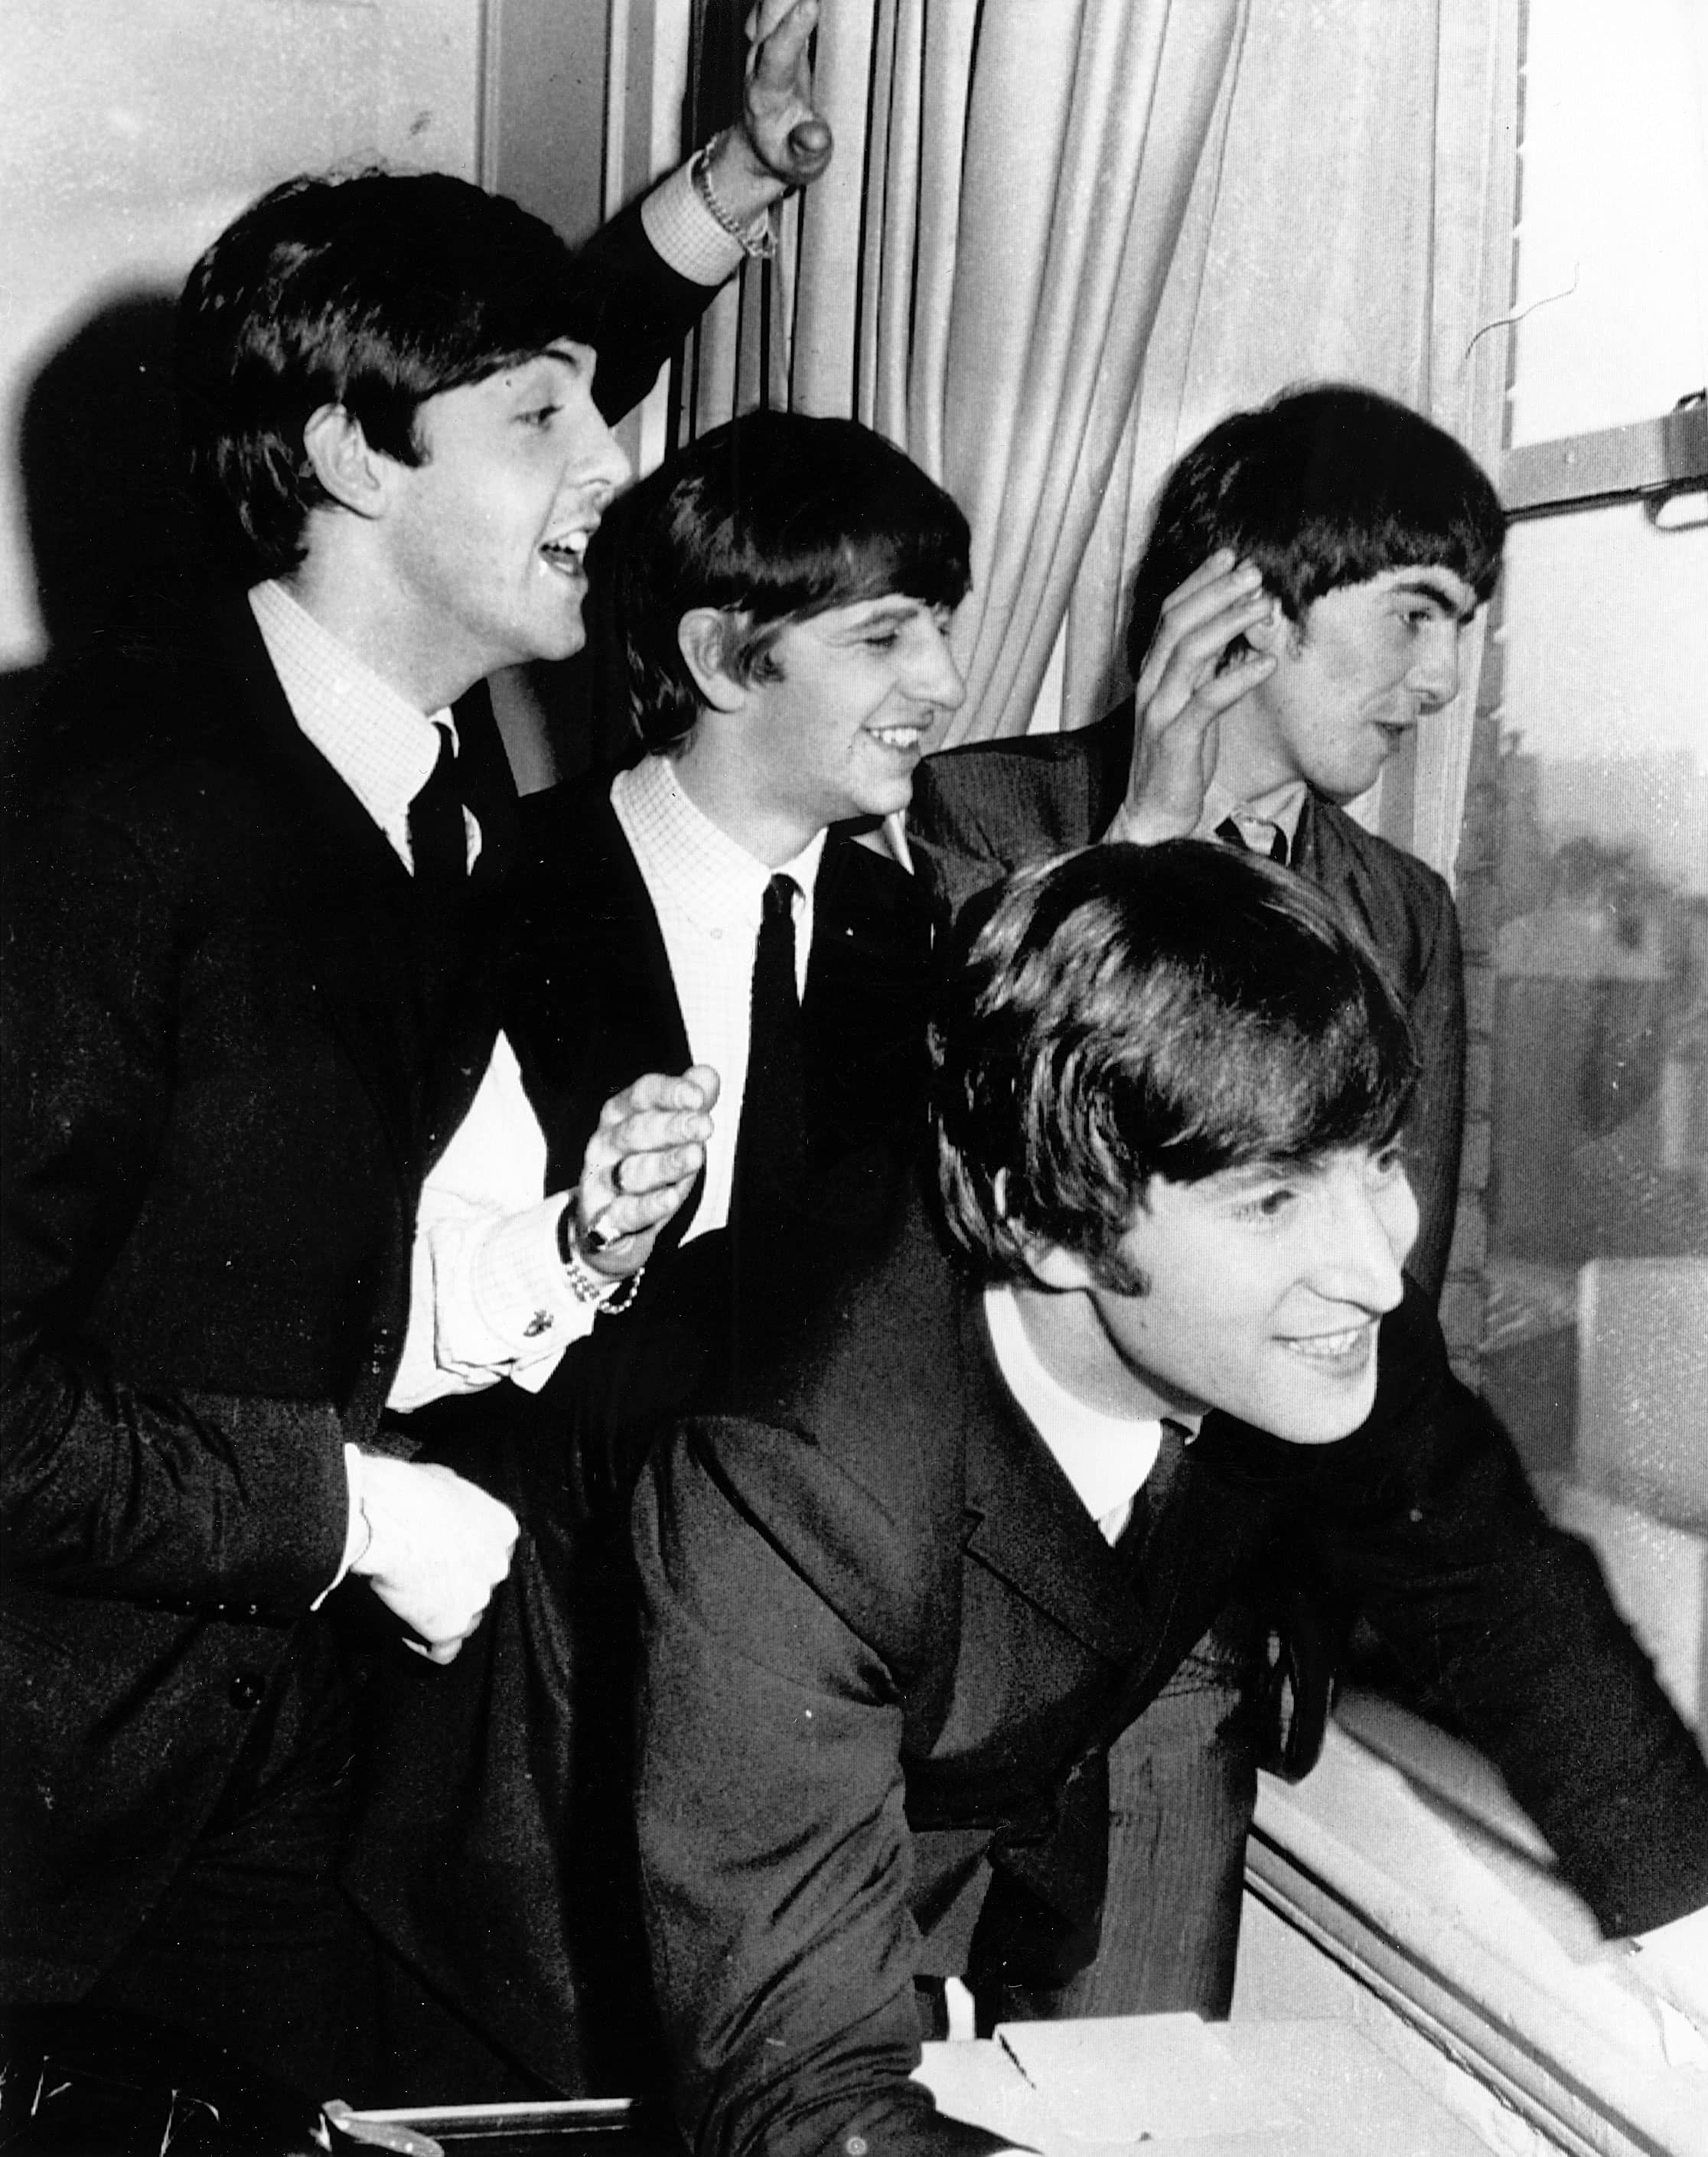 7 February 1964: The Beatles' American invasion begins | The Beatles ...